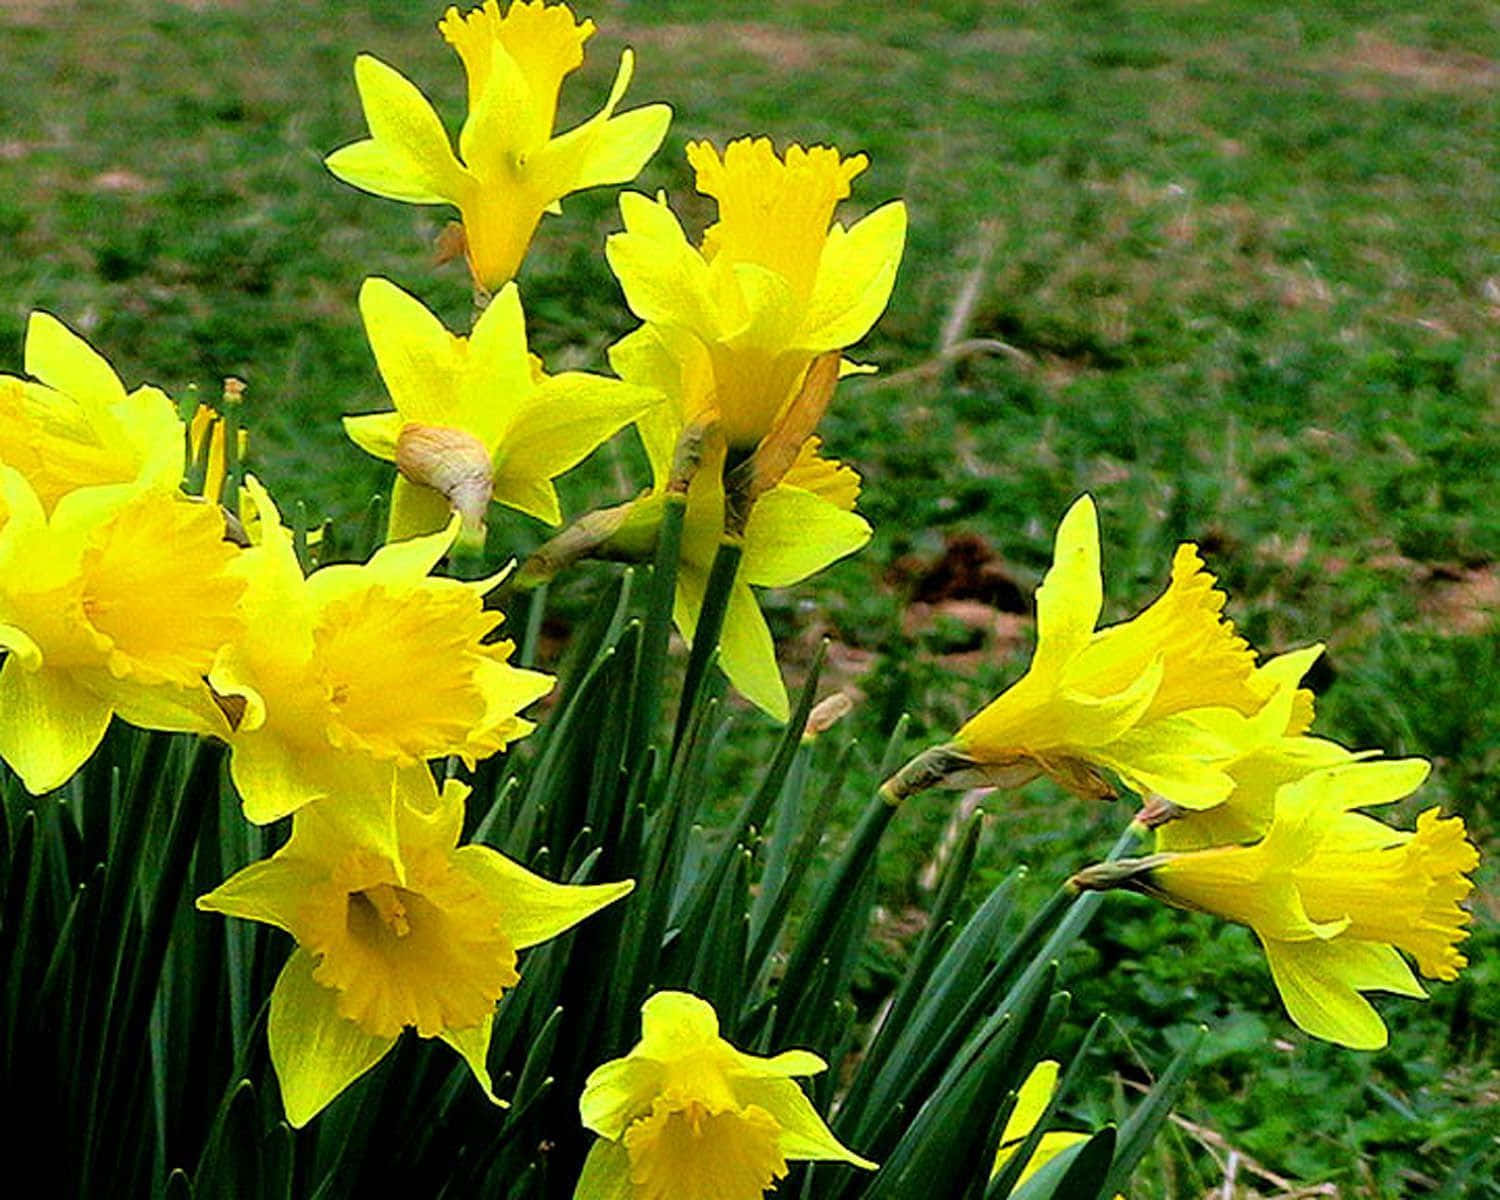 A bright and cheery daffodil flower in full bloom